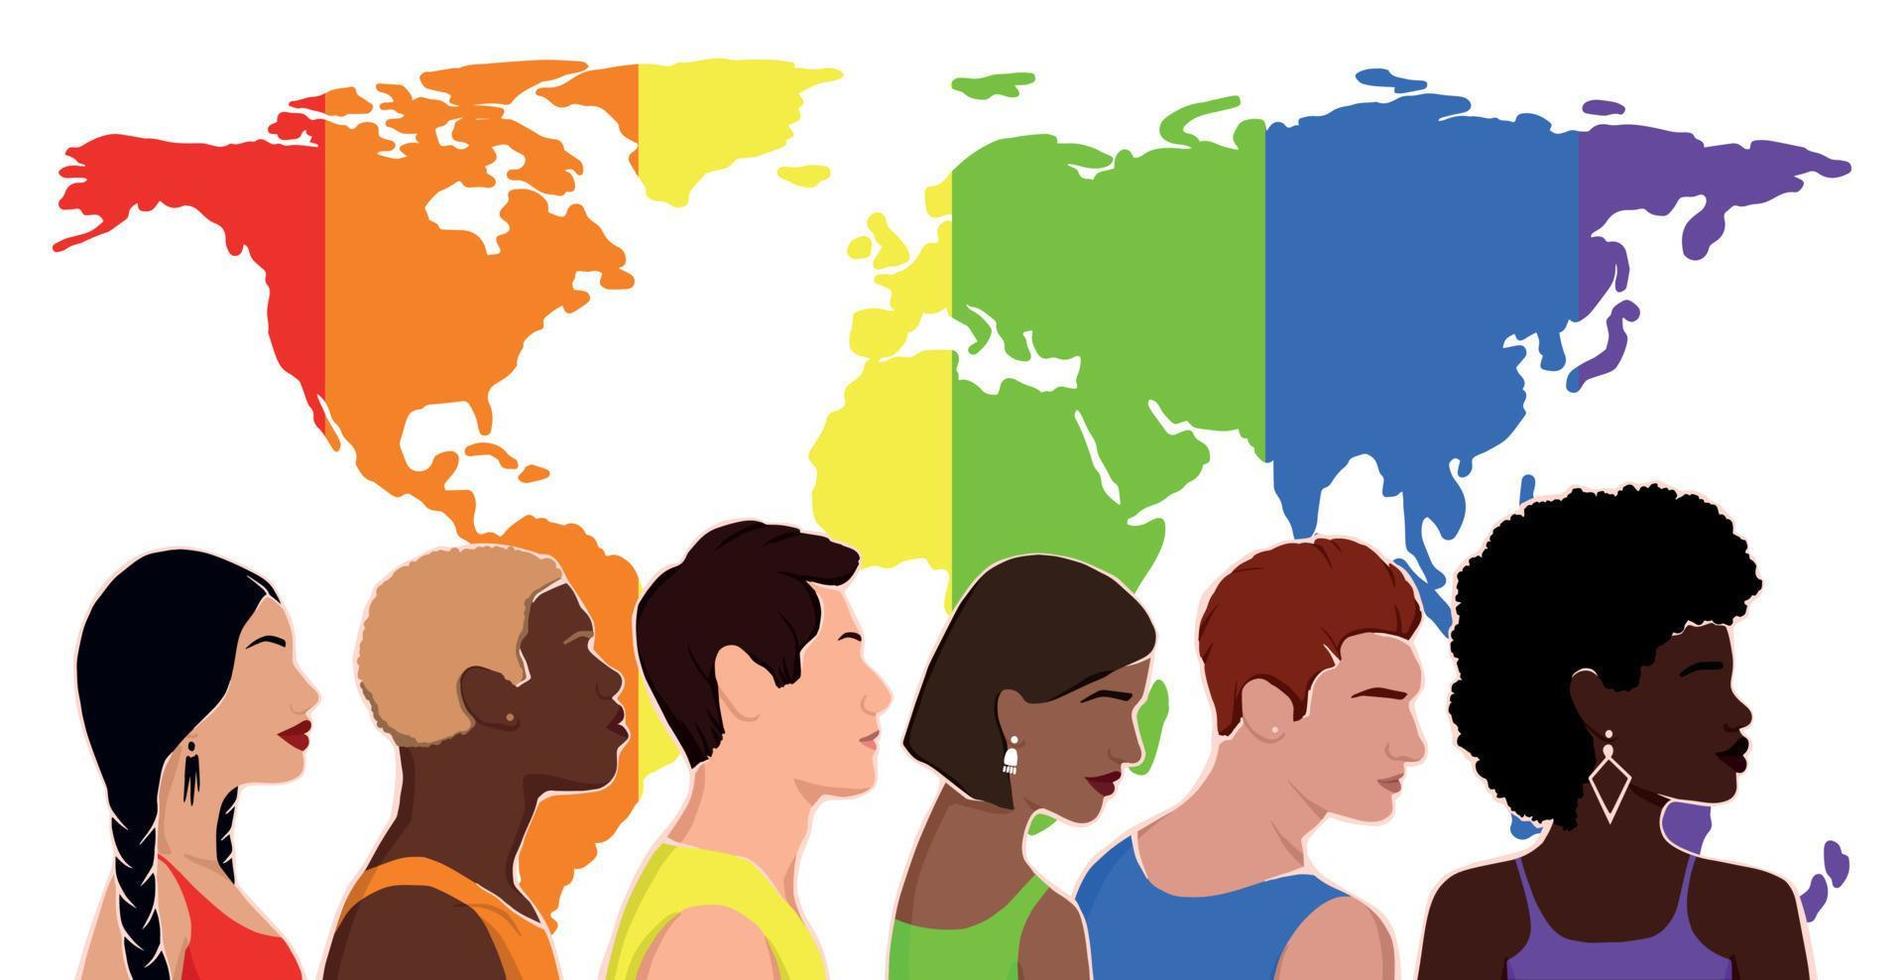 people from different ethnic groups in rainbow-colored clothes. LGBT community. Human rights. LGBTQ. Flat illustration with map. pride month. vector